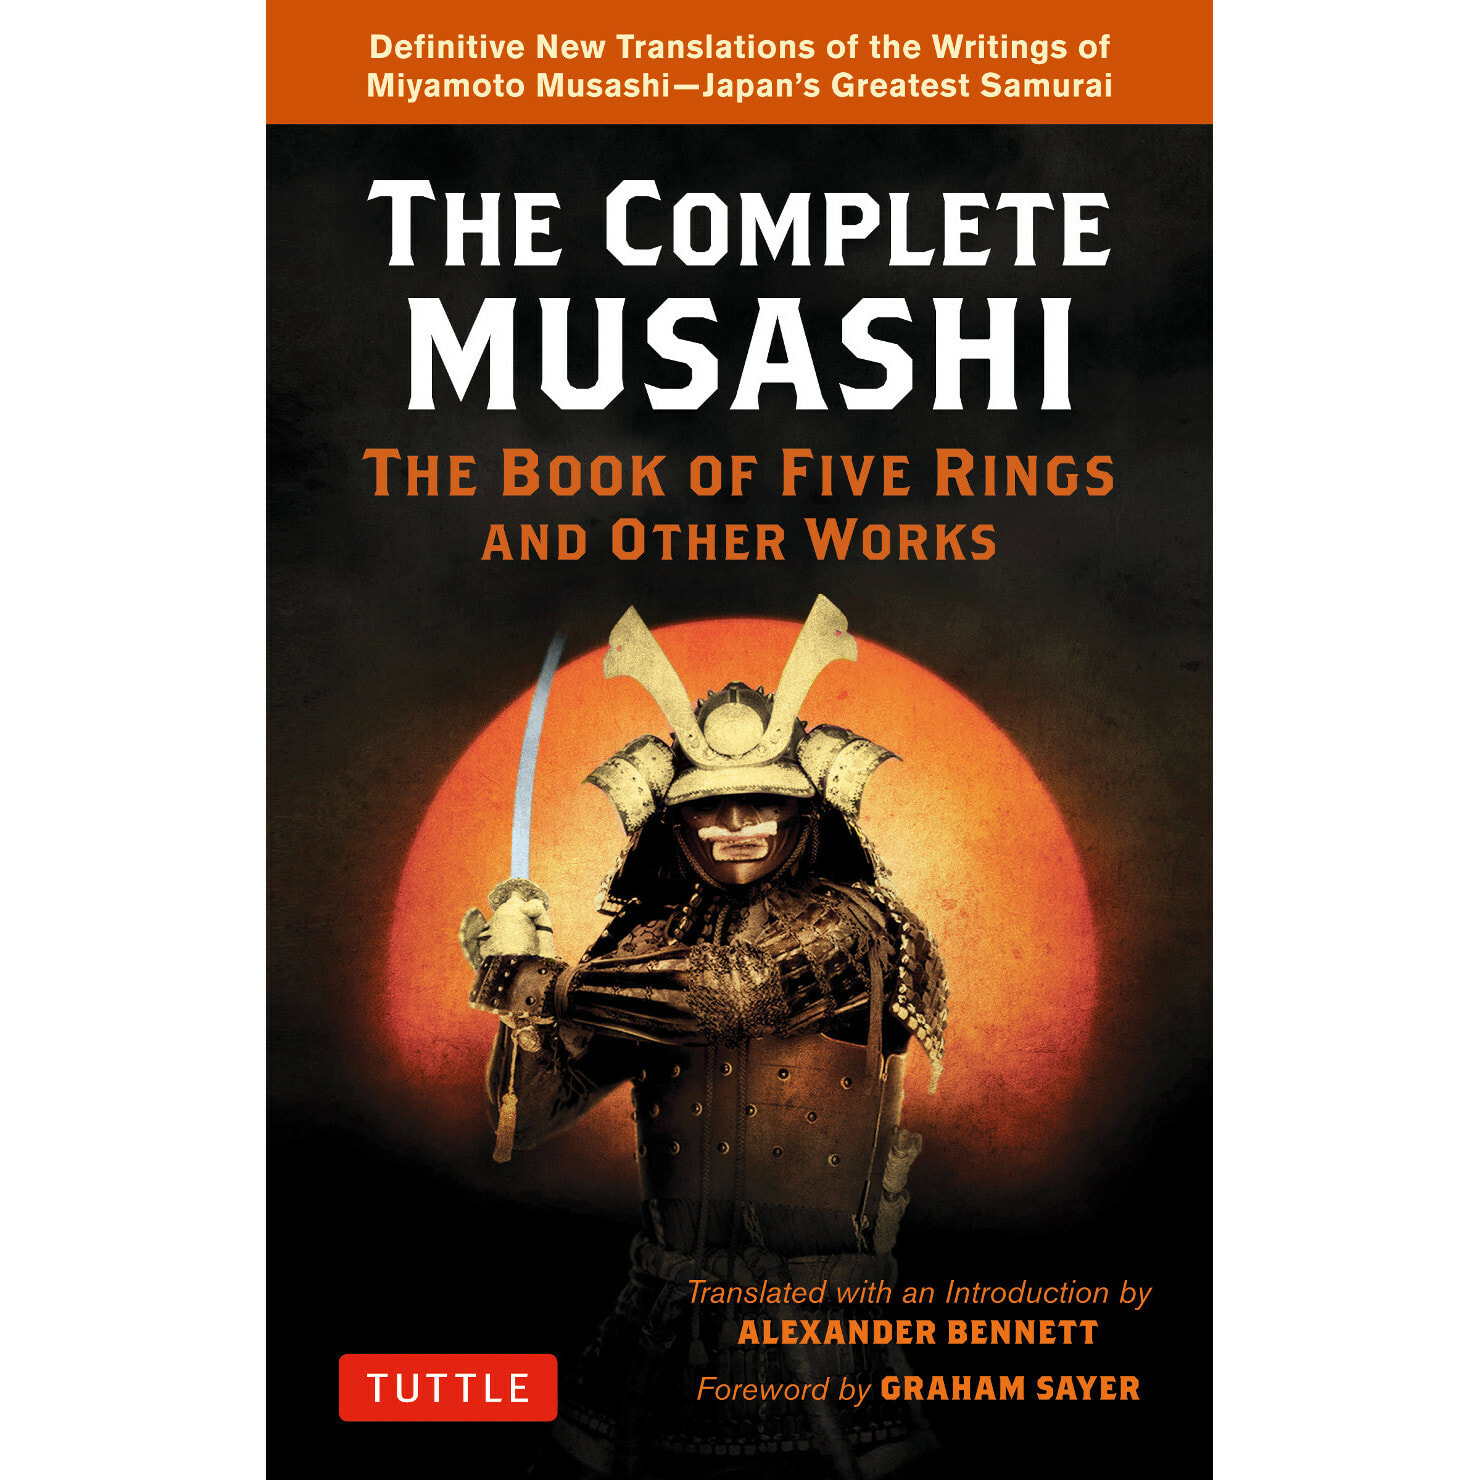 PewDiePie's Literature Club - March 2018: A Book of Five Rings - Miyamoto  Musashi Showing 1-8 of 8